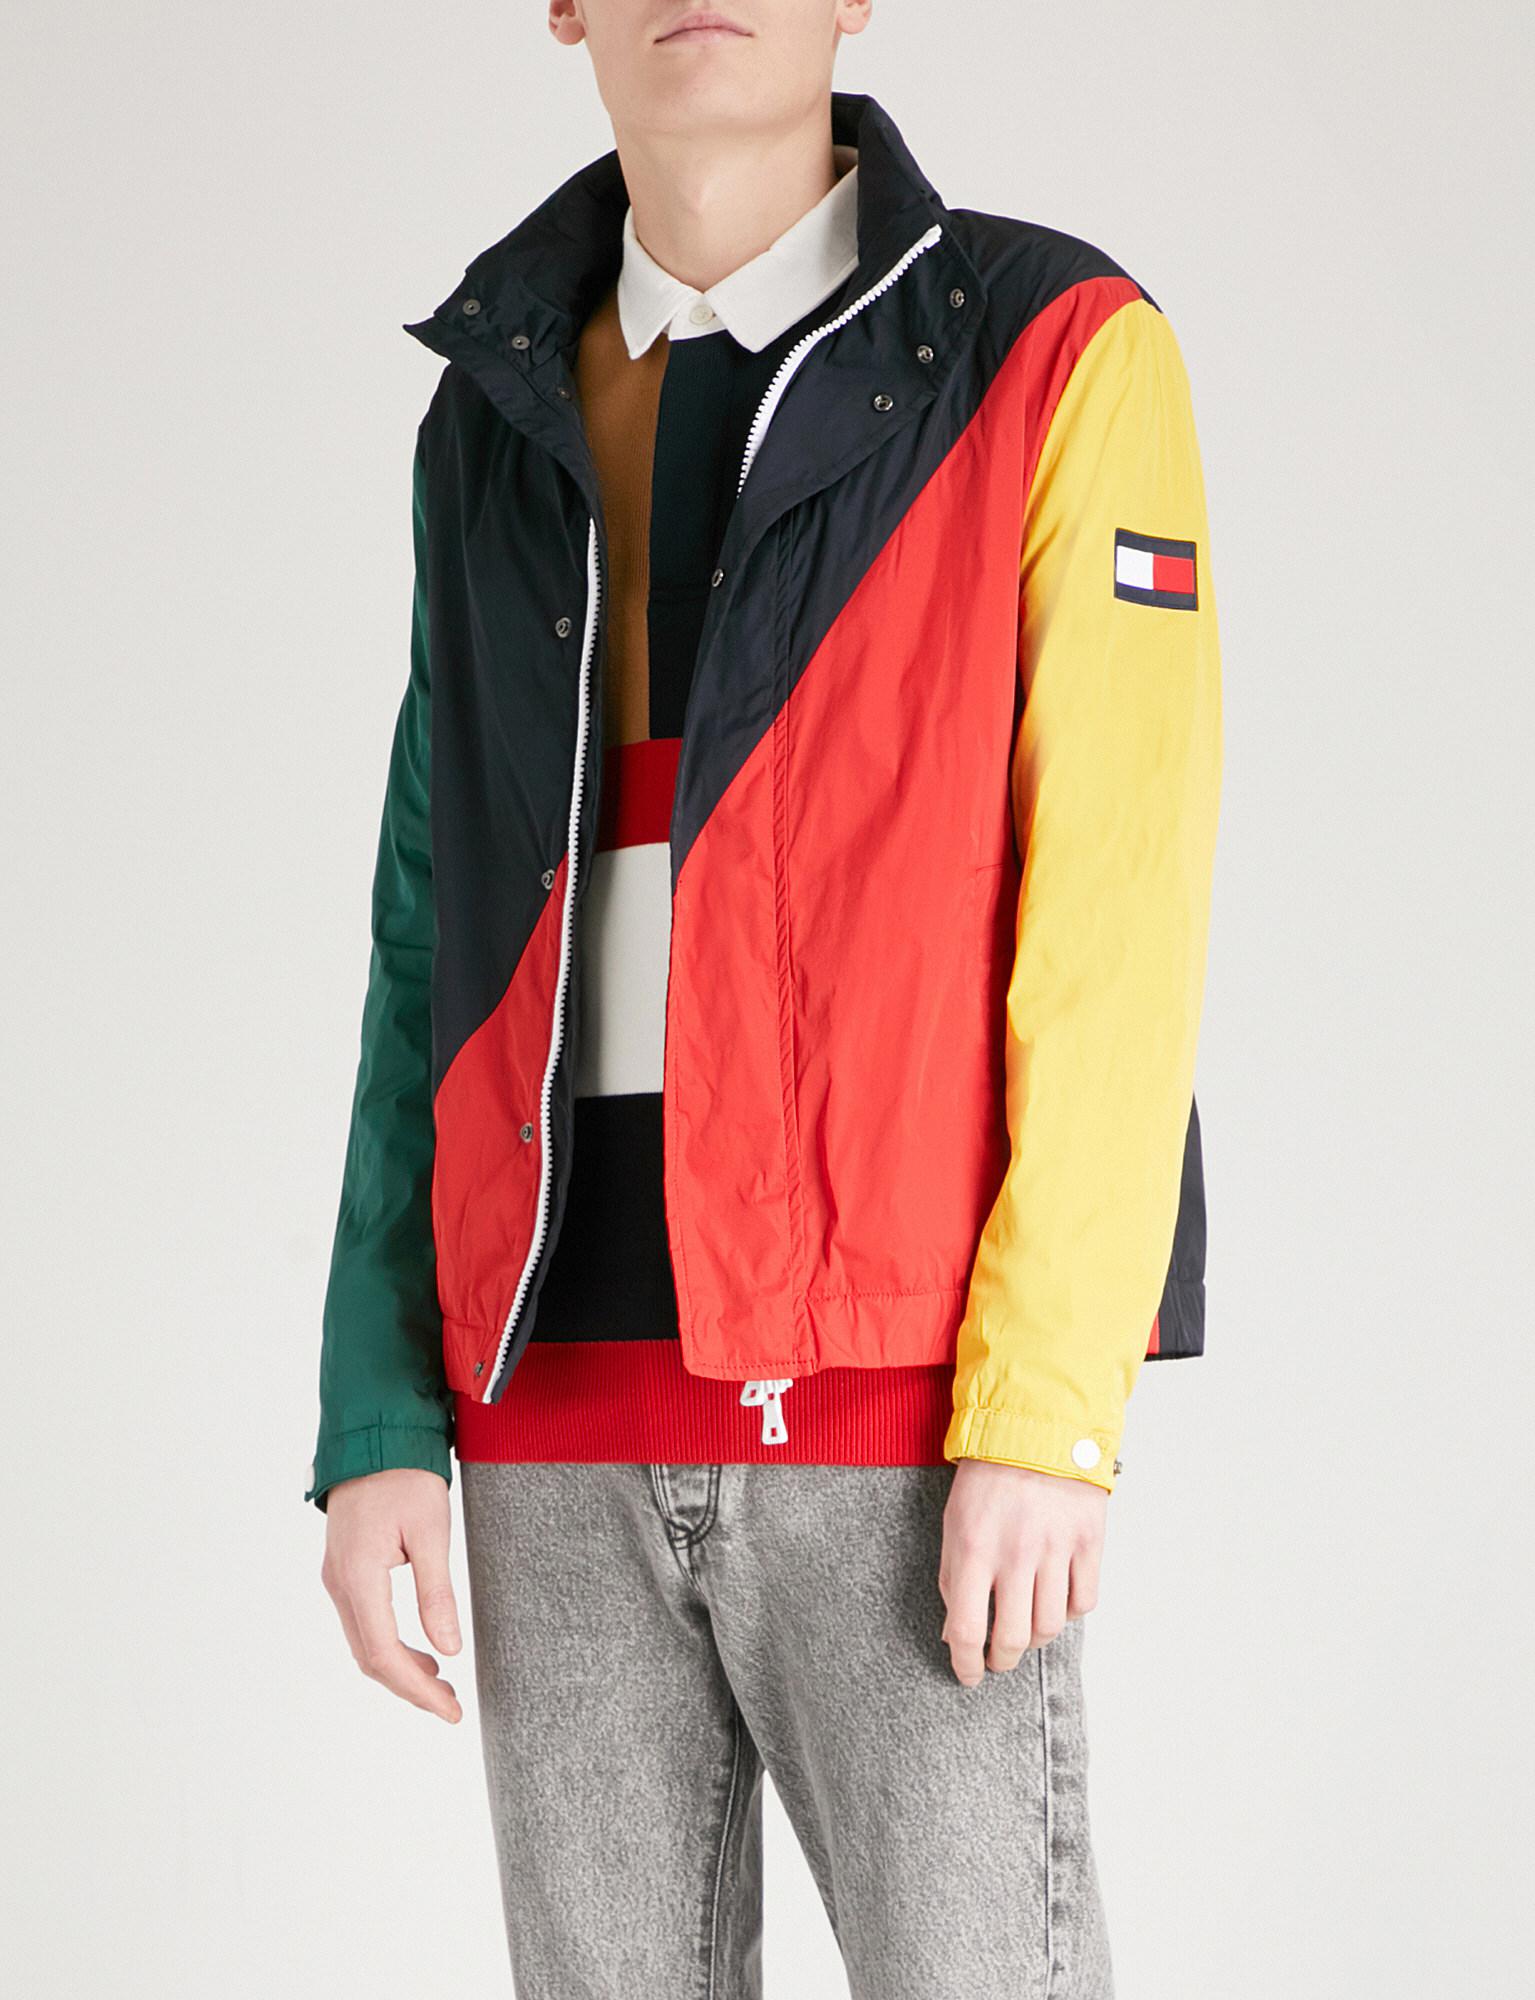 Tommy Hilfiger Colorblocked Sailing Jacket on Sale, 55% OFF |  www.velocityusa.com